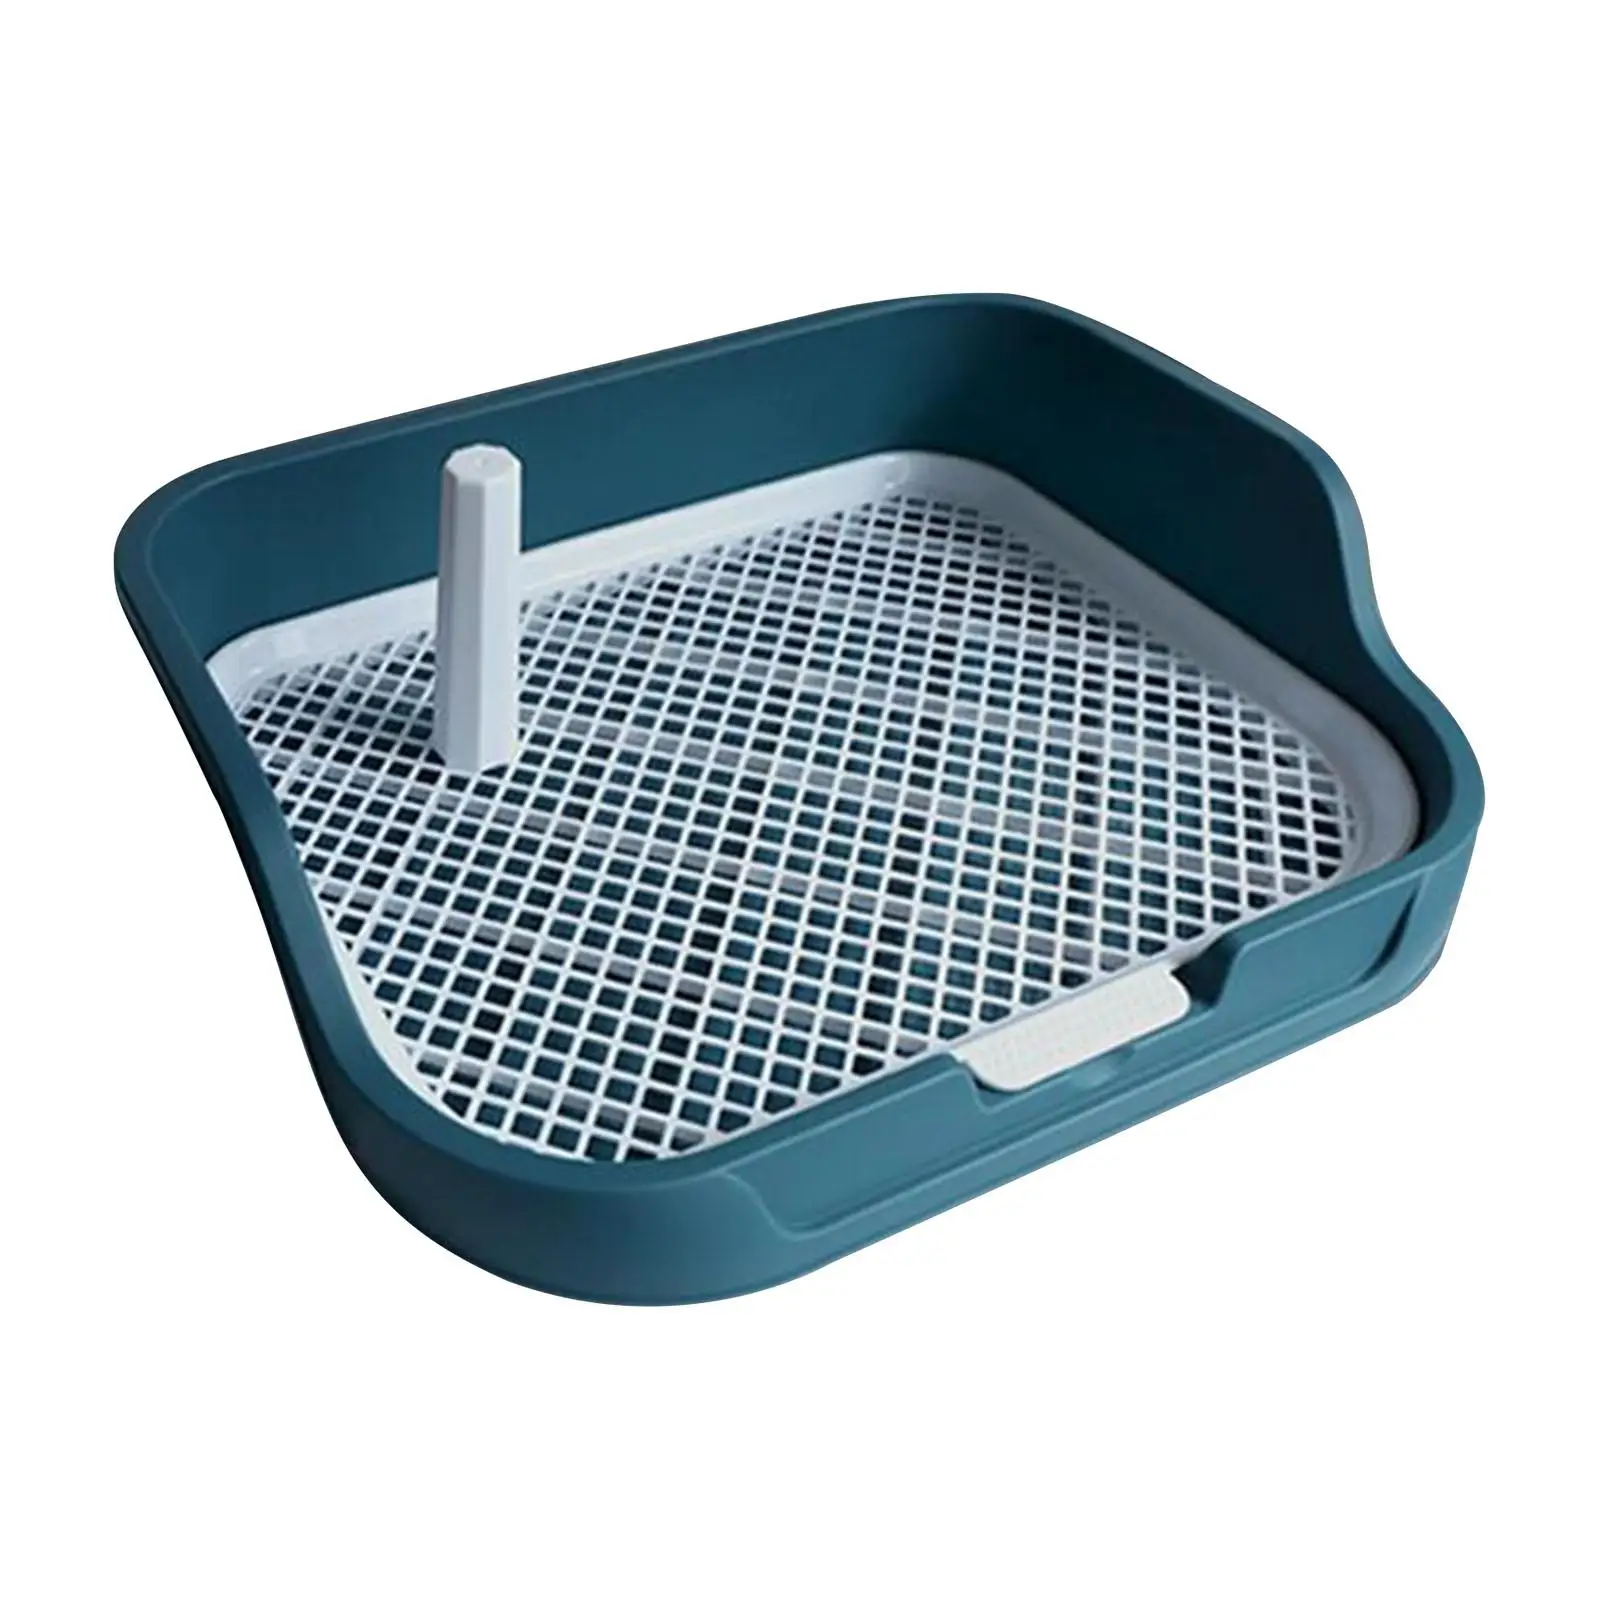 Mesh Grids Pet Training Toilet Reusable Durable Comfortable Dog Toilet for Puppy Bunny Cats Small and Medium Dogs Indoor